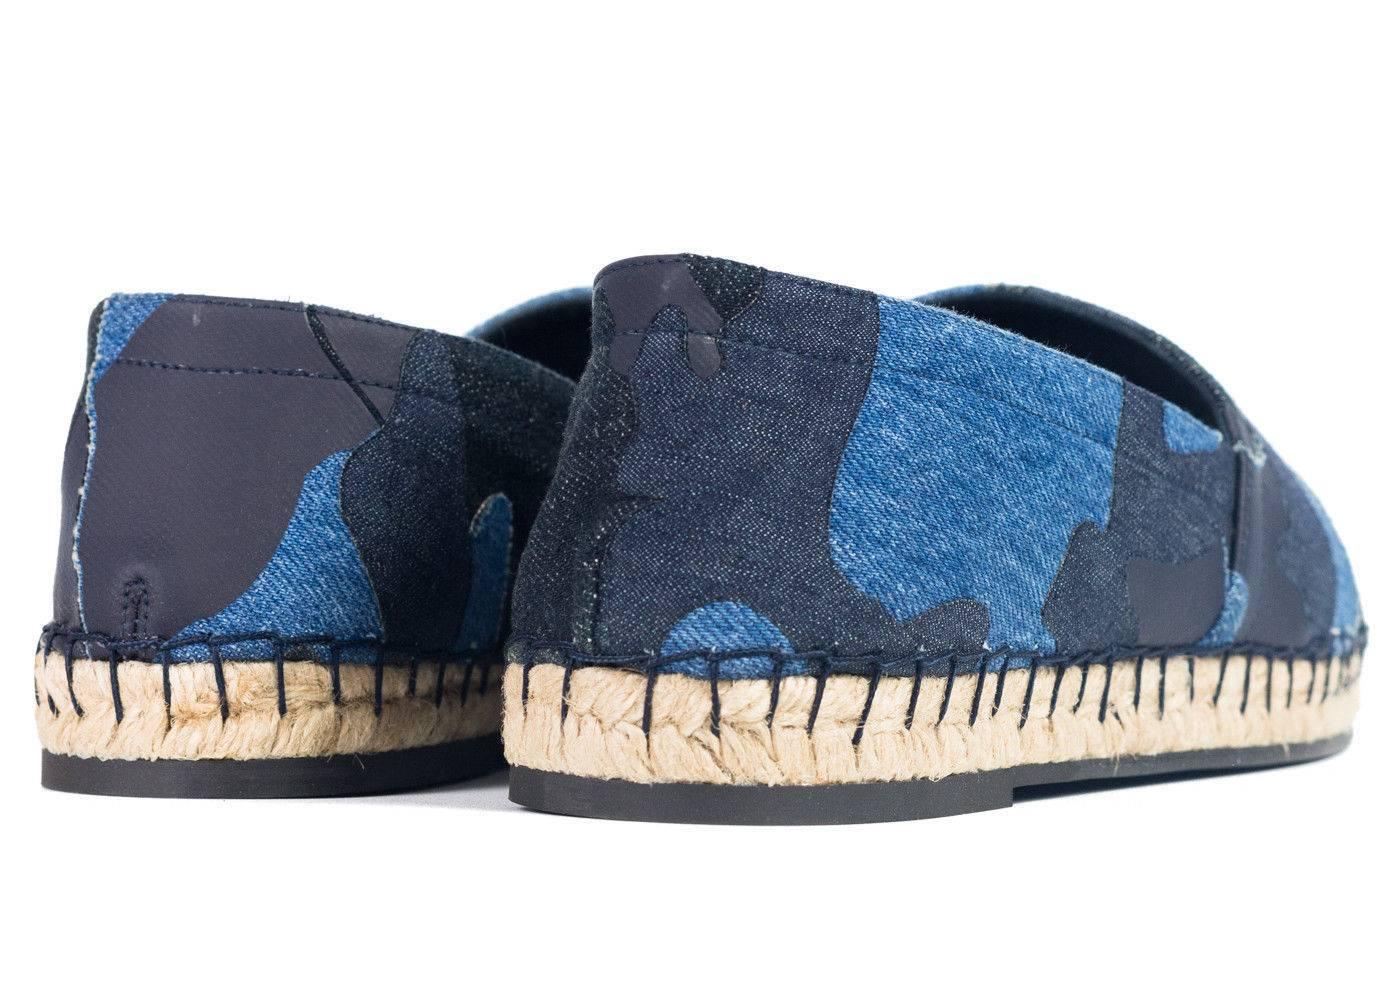 Canvas espadrilles featuring camouflage pattern in tones of 'army' Blue and black throughout. Woven accent in taupe at round toe. Blanket stitching at welt. Braided jute midsole. Rubber sole in tan. Tonal stitching. Perfect for a pair of Jeans a